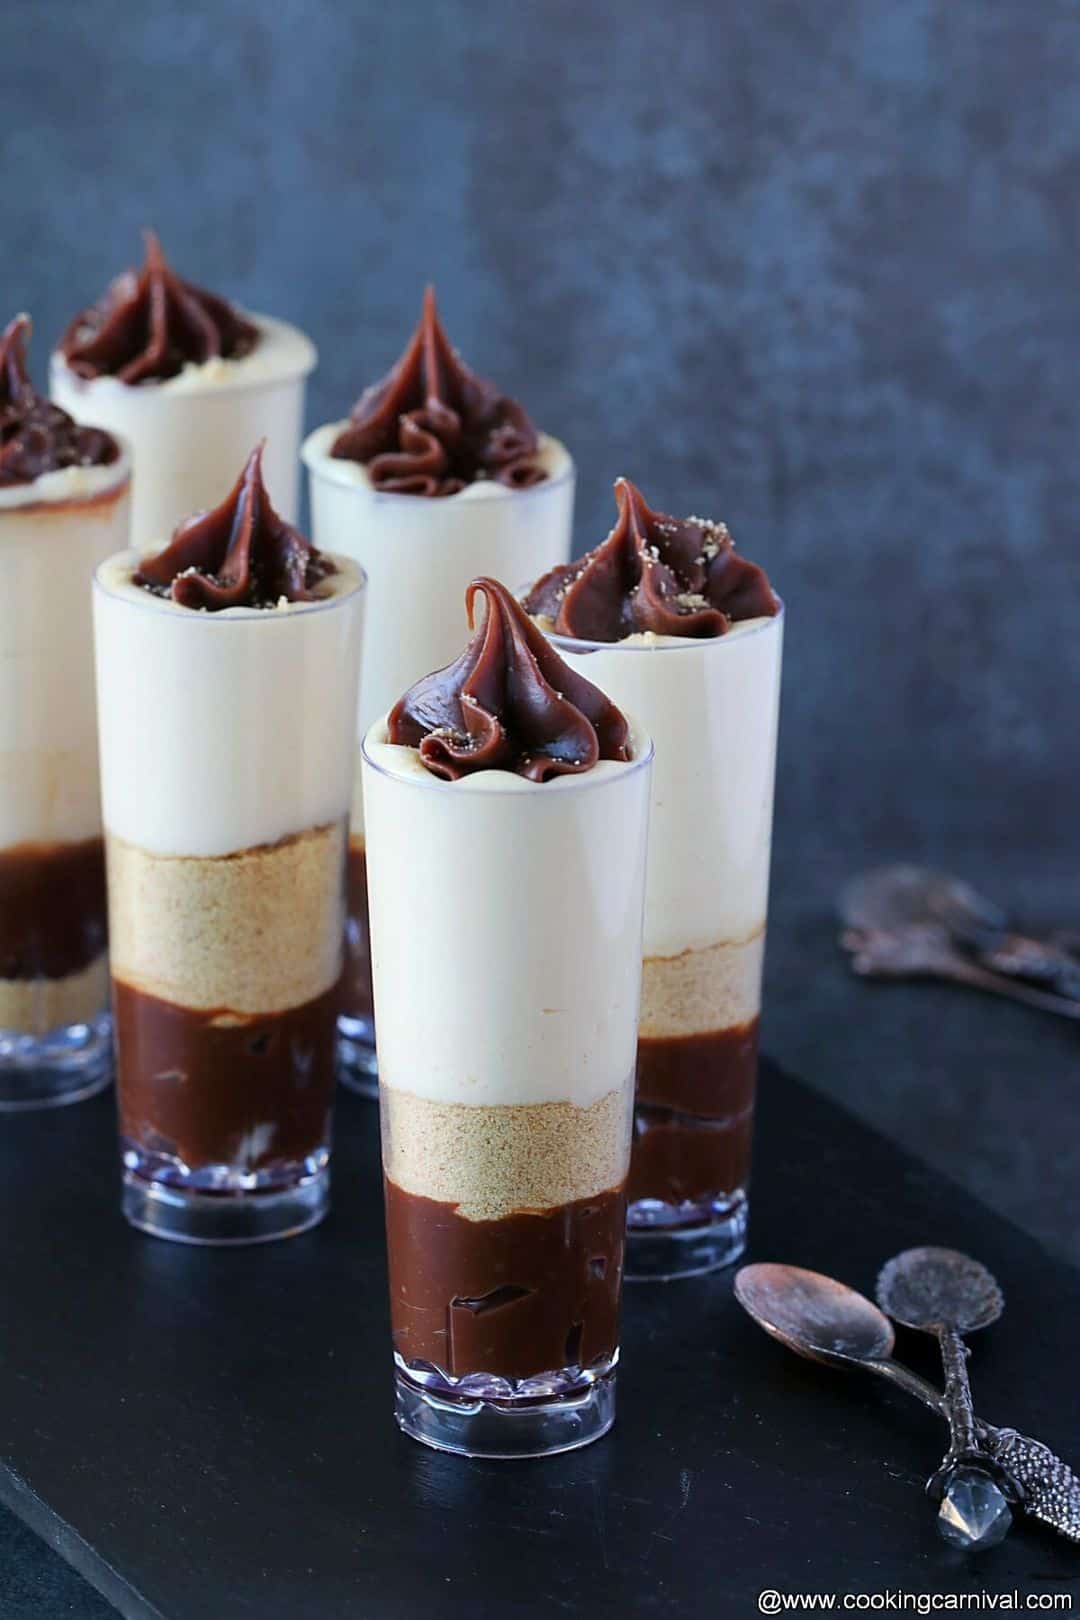 Mini cheesecakes assembled in tall glasses with caramel sauce and chocolate truffle sauce